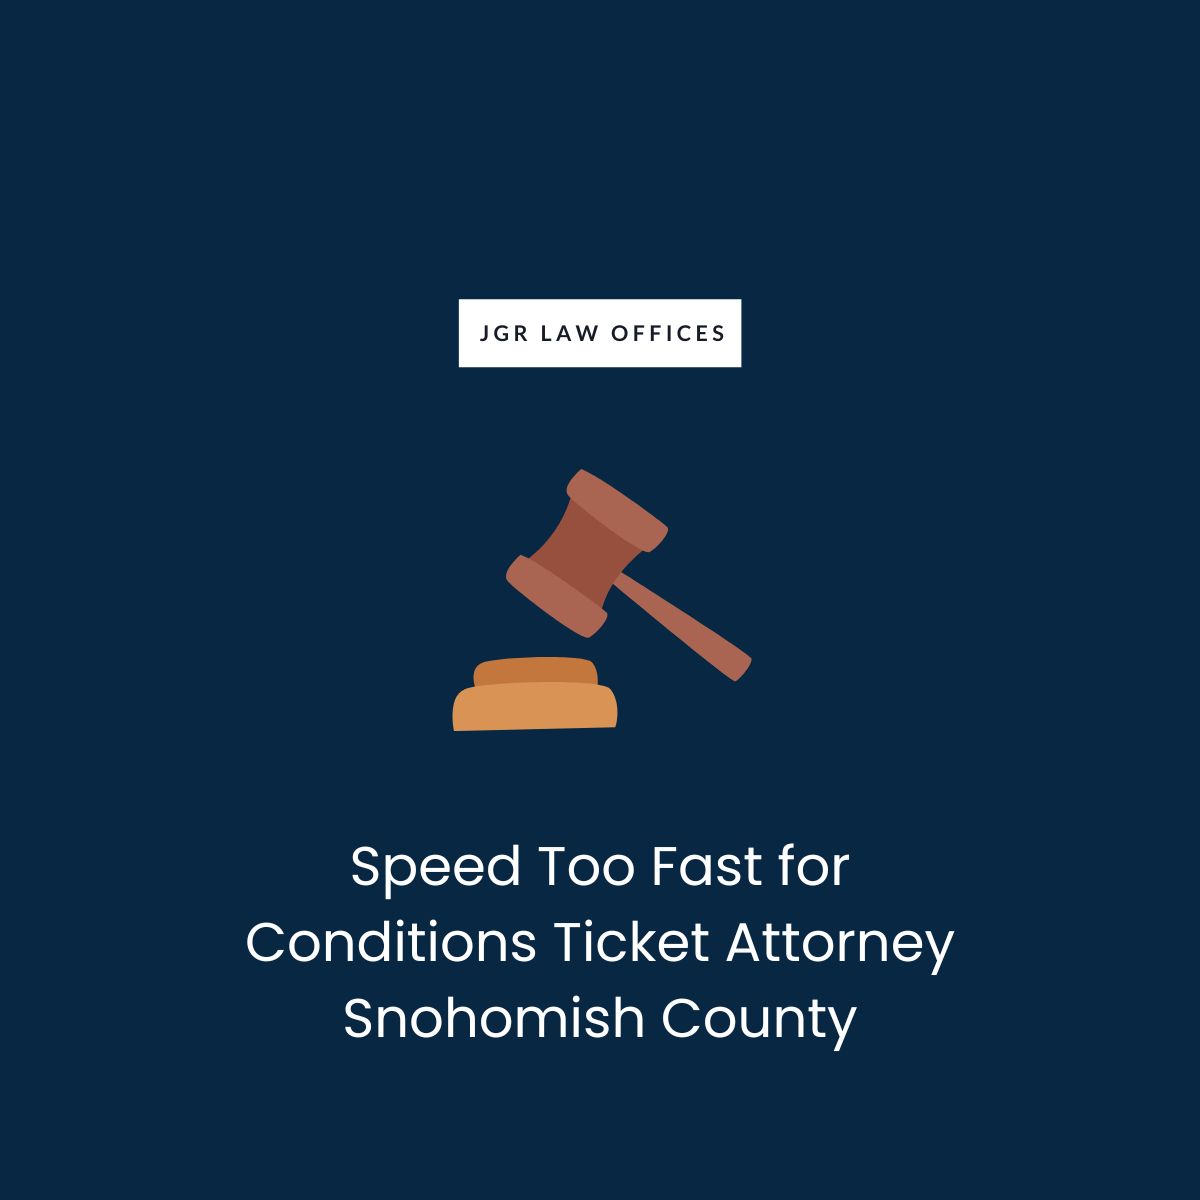 Speed Too Fast for Conditions Ticket Attorney Snohomish County